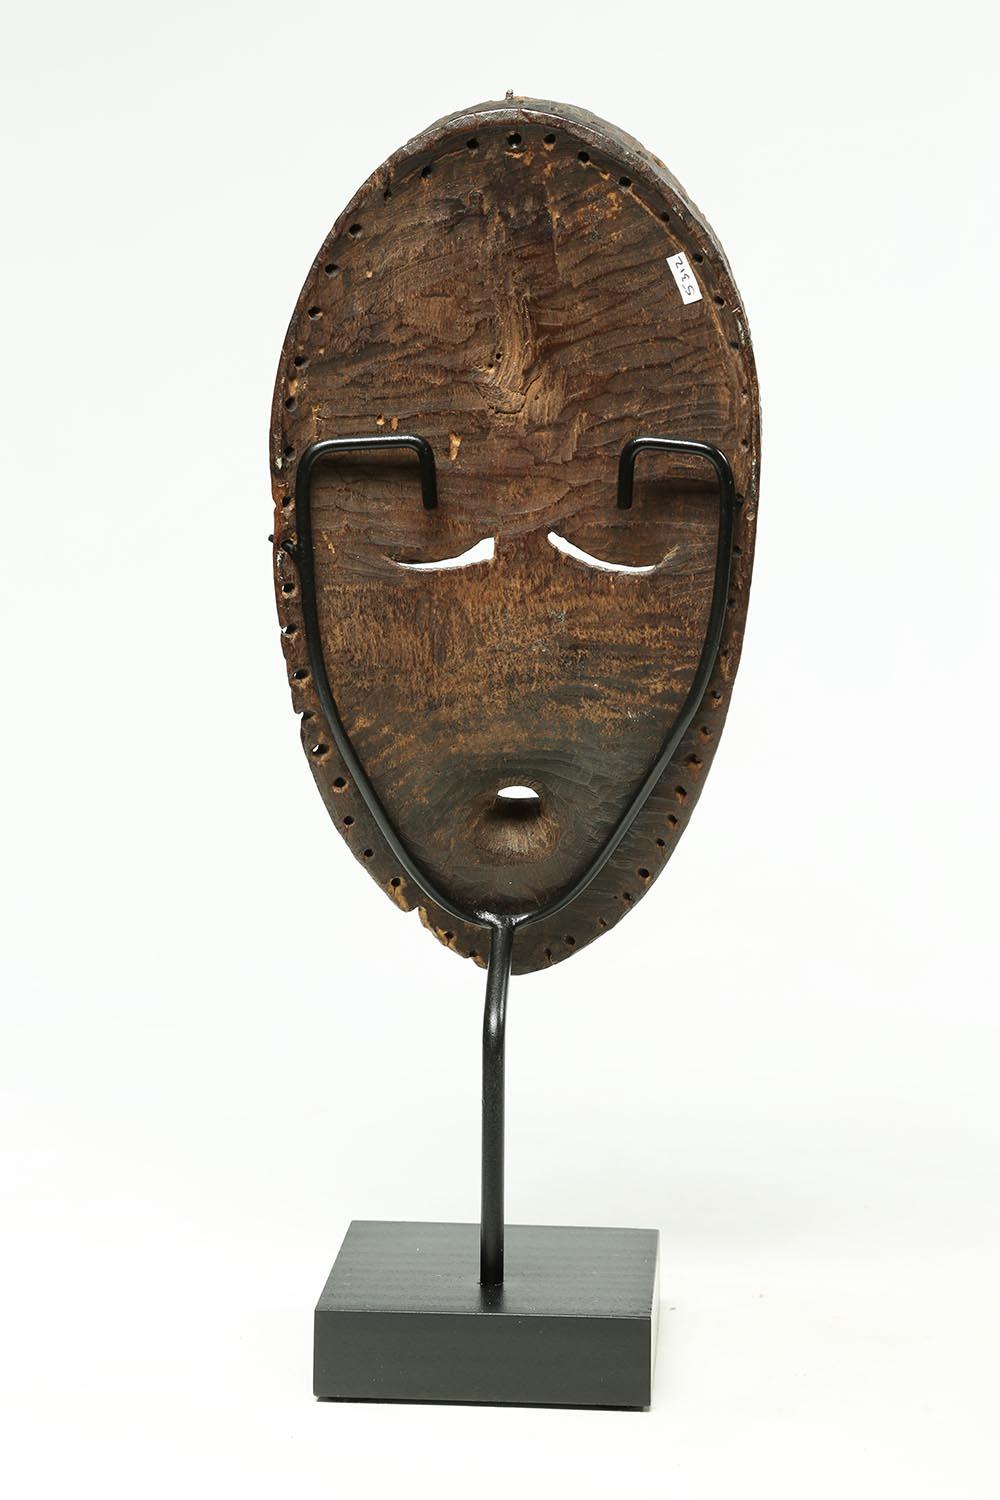 Well-used Bassa dance mask, thin and elegant wood carving with geometric features that would have been attached to a much larger dance costume. The Bassa are from Liberia, West Africa. Finely carved with good evidence of wear from use on the back.